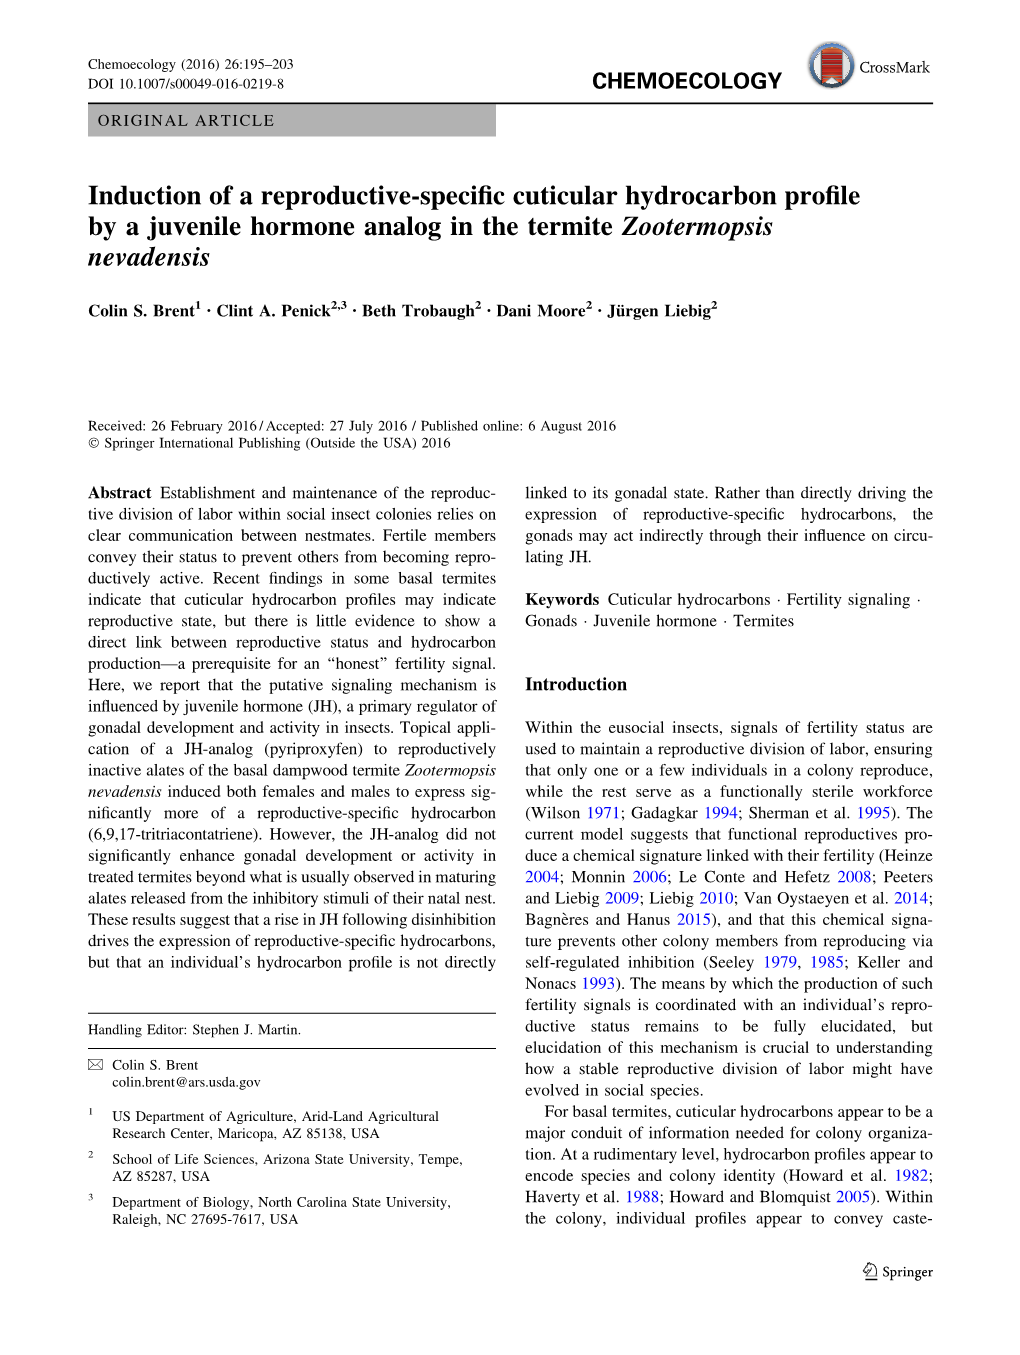 Induction of a Reproductive-Specific Cuticular Hydrocarbon Profile by A